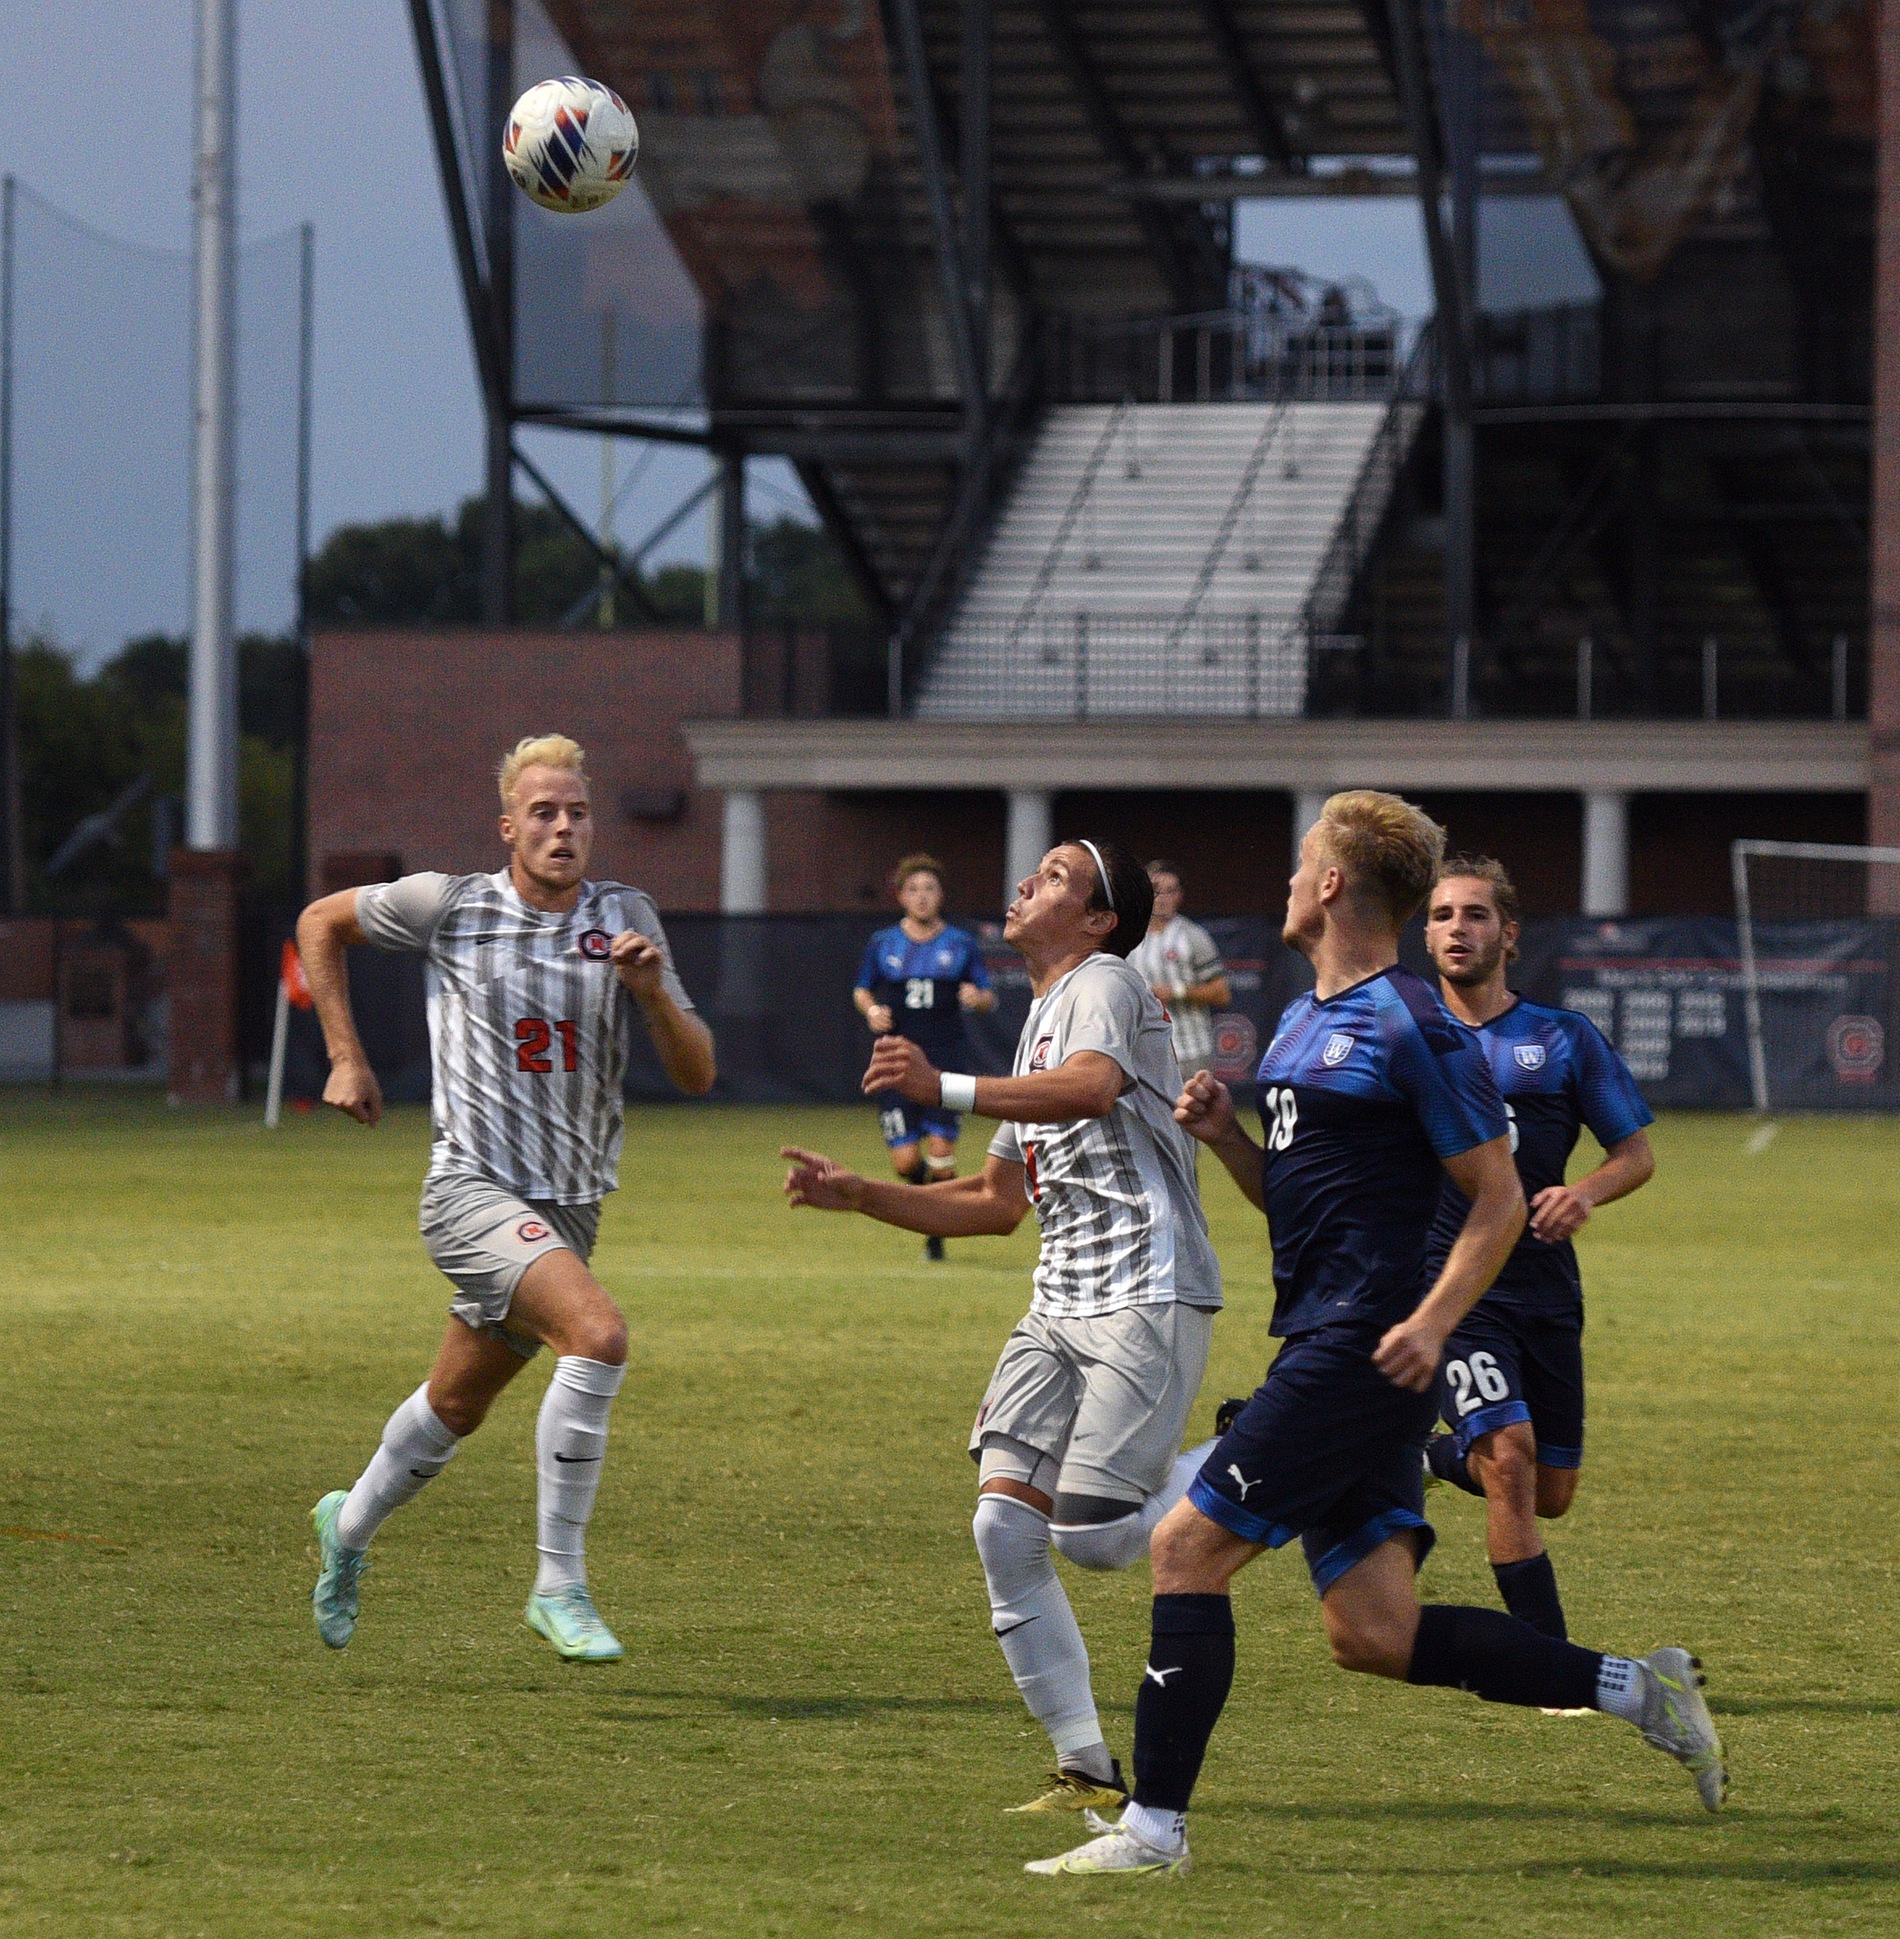 Eagles and Cobras play to 1-1 draw at McCown field